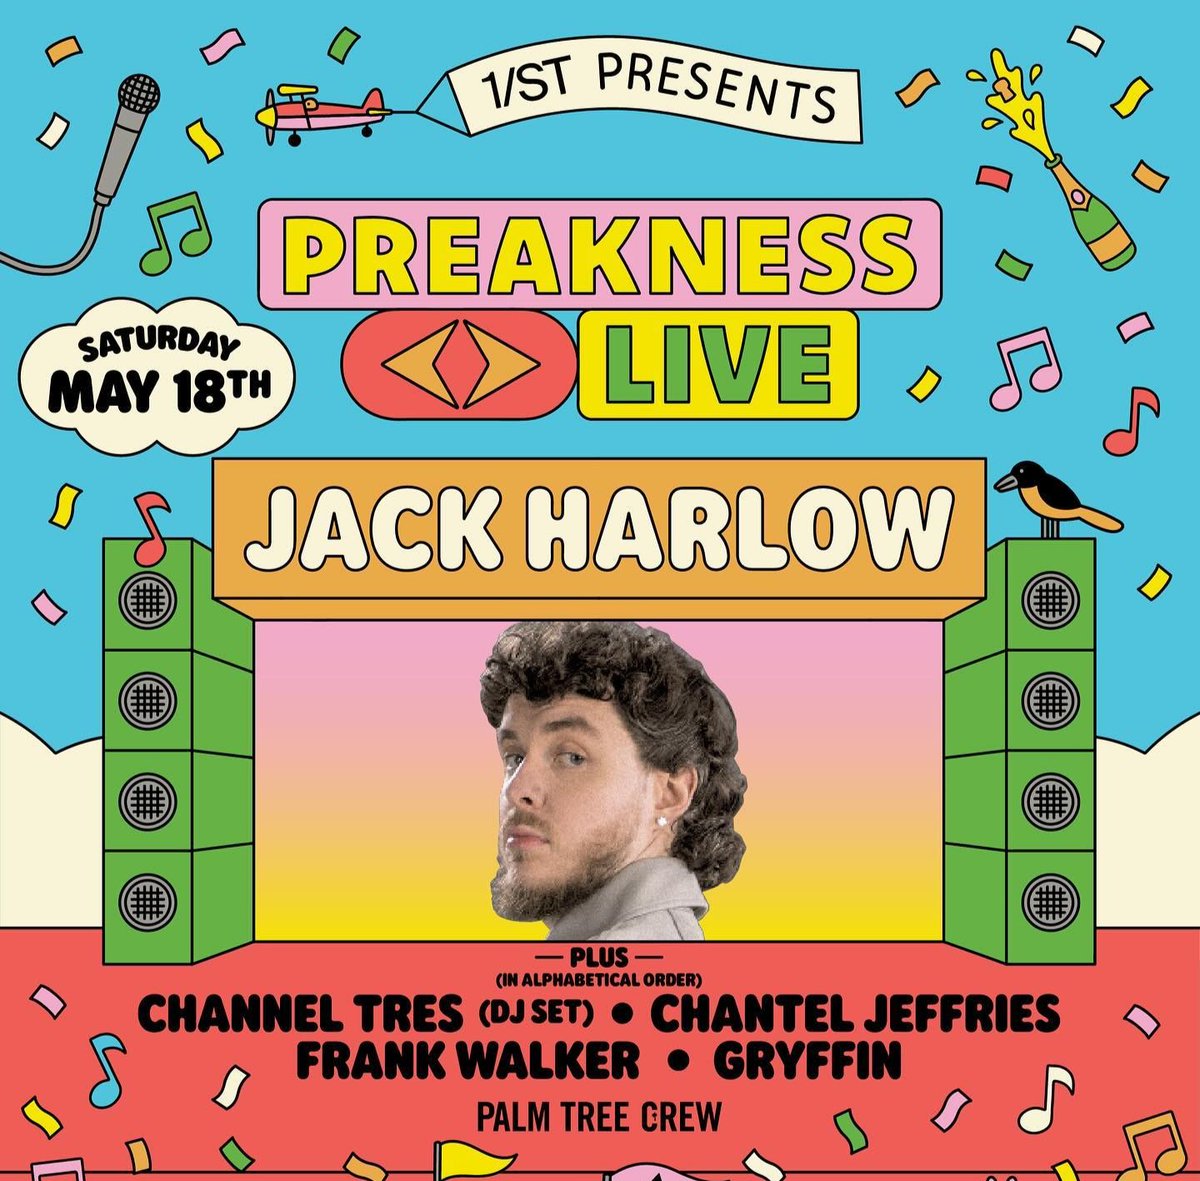 Get ready to feel the beat and vibe out at Maryland's largest music festival, @preakness_live! There's still time to secure a ticket! Tag your squad and click the link below for 15% OFF! ow.ly/HjV750RK3G0 Cheers to an unforgettable weekend, see you there!